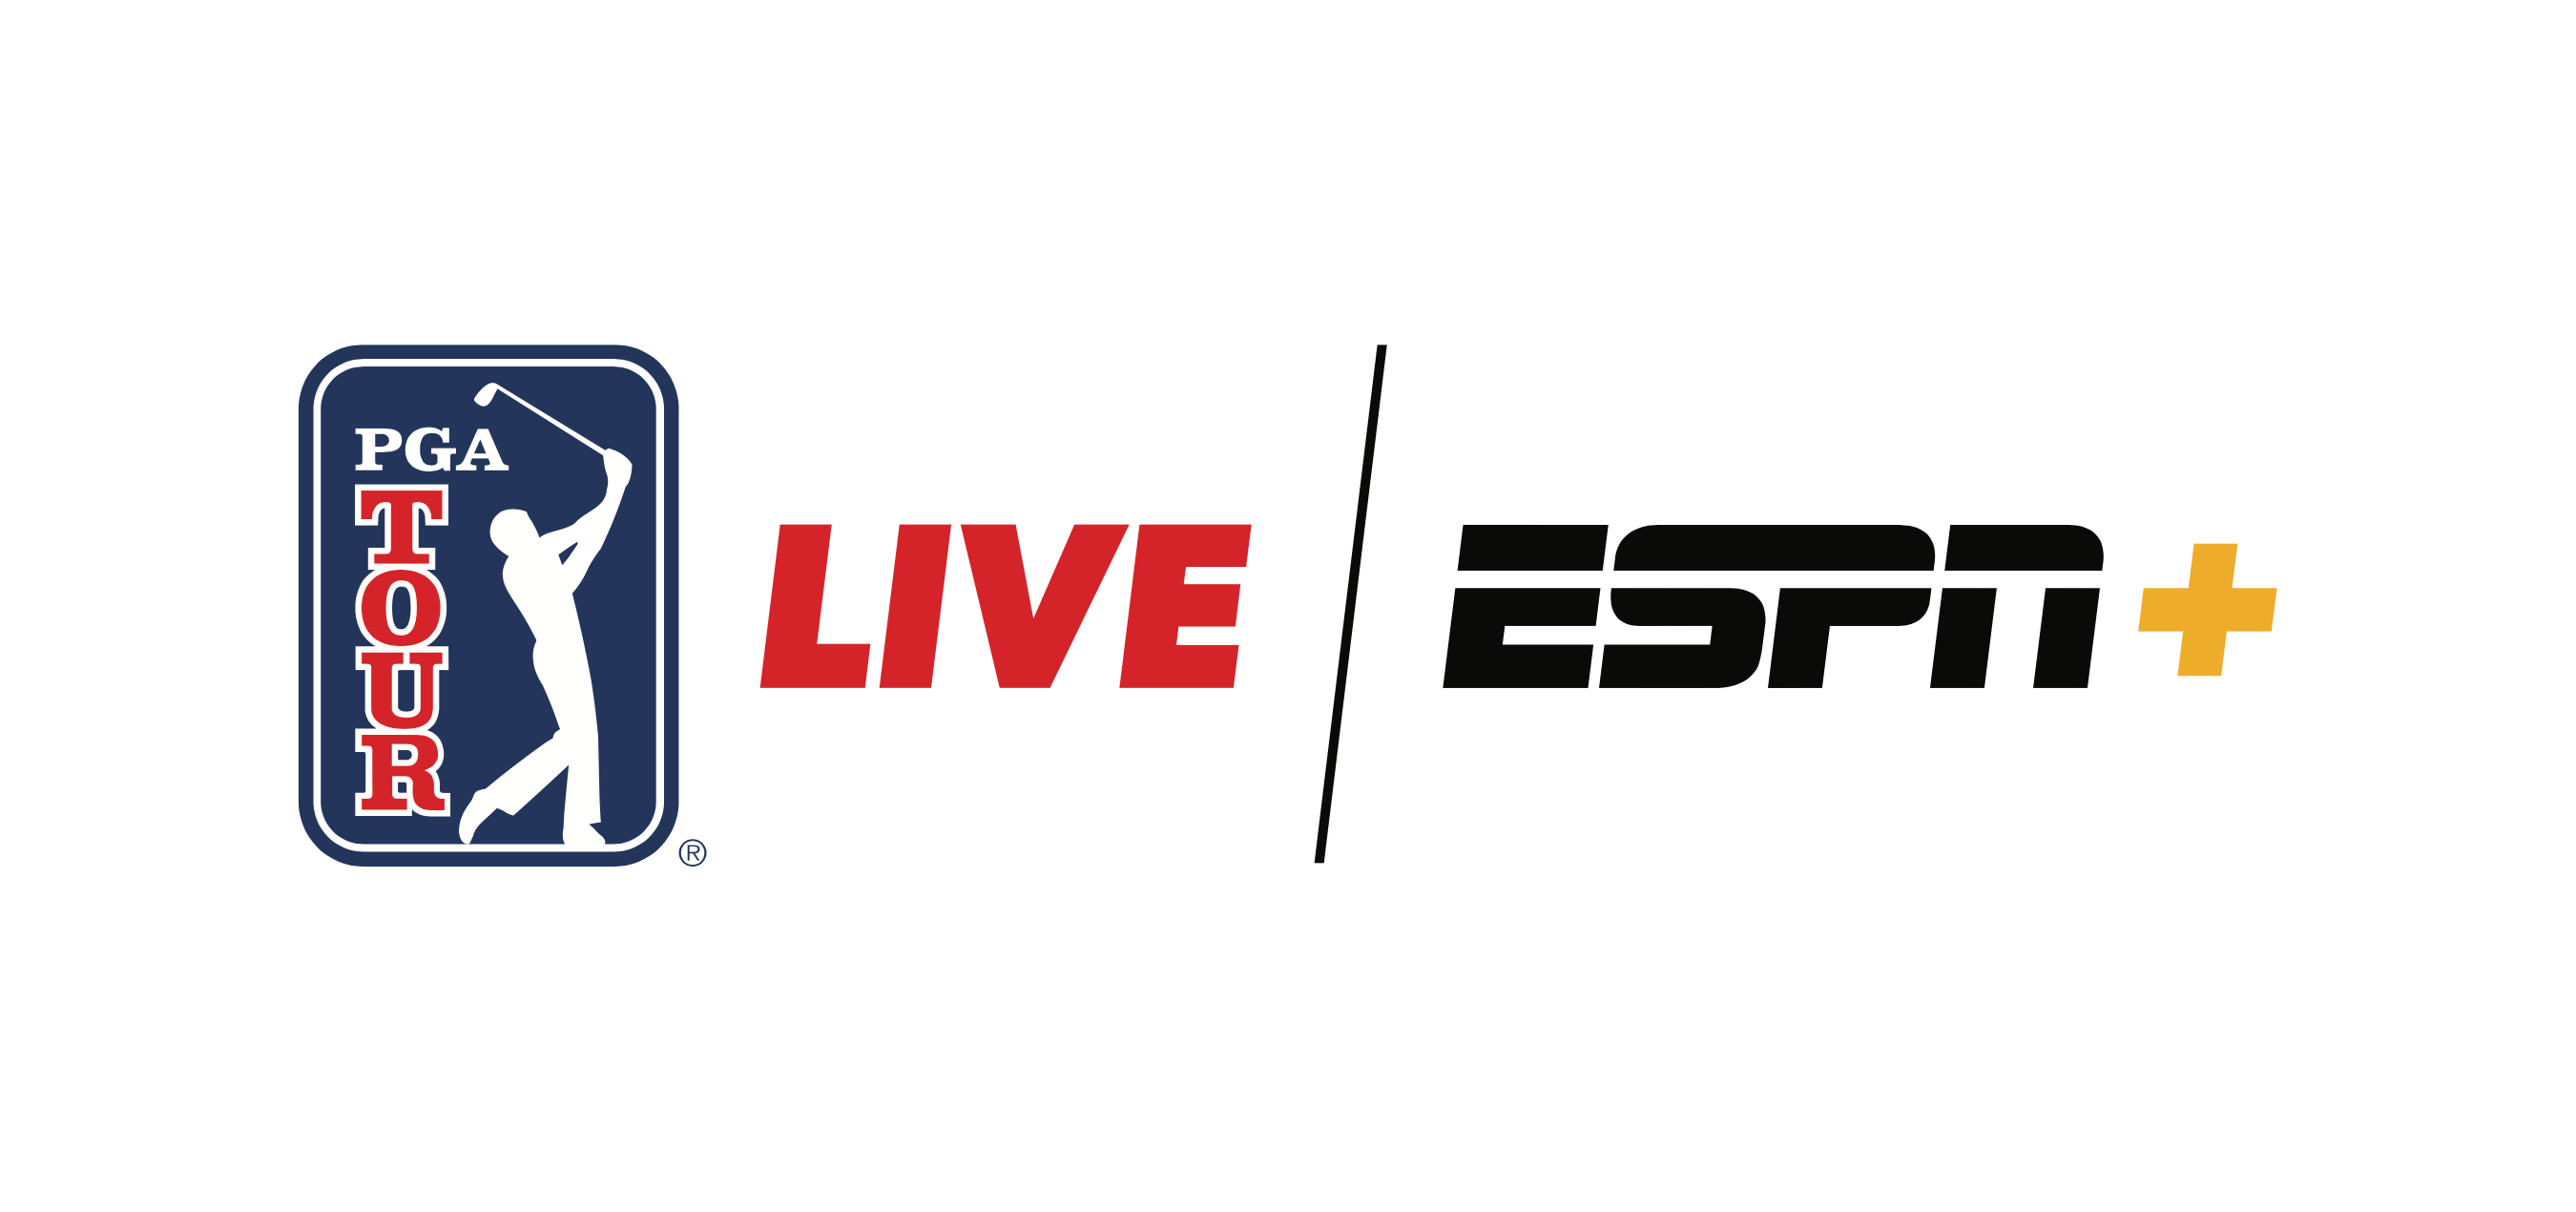 PGA Tour Live on ESPN+ to Launch in January 2022